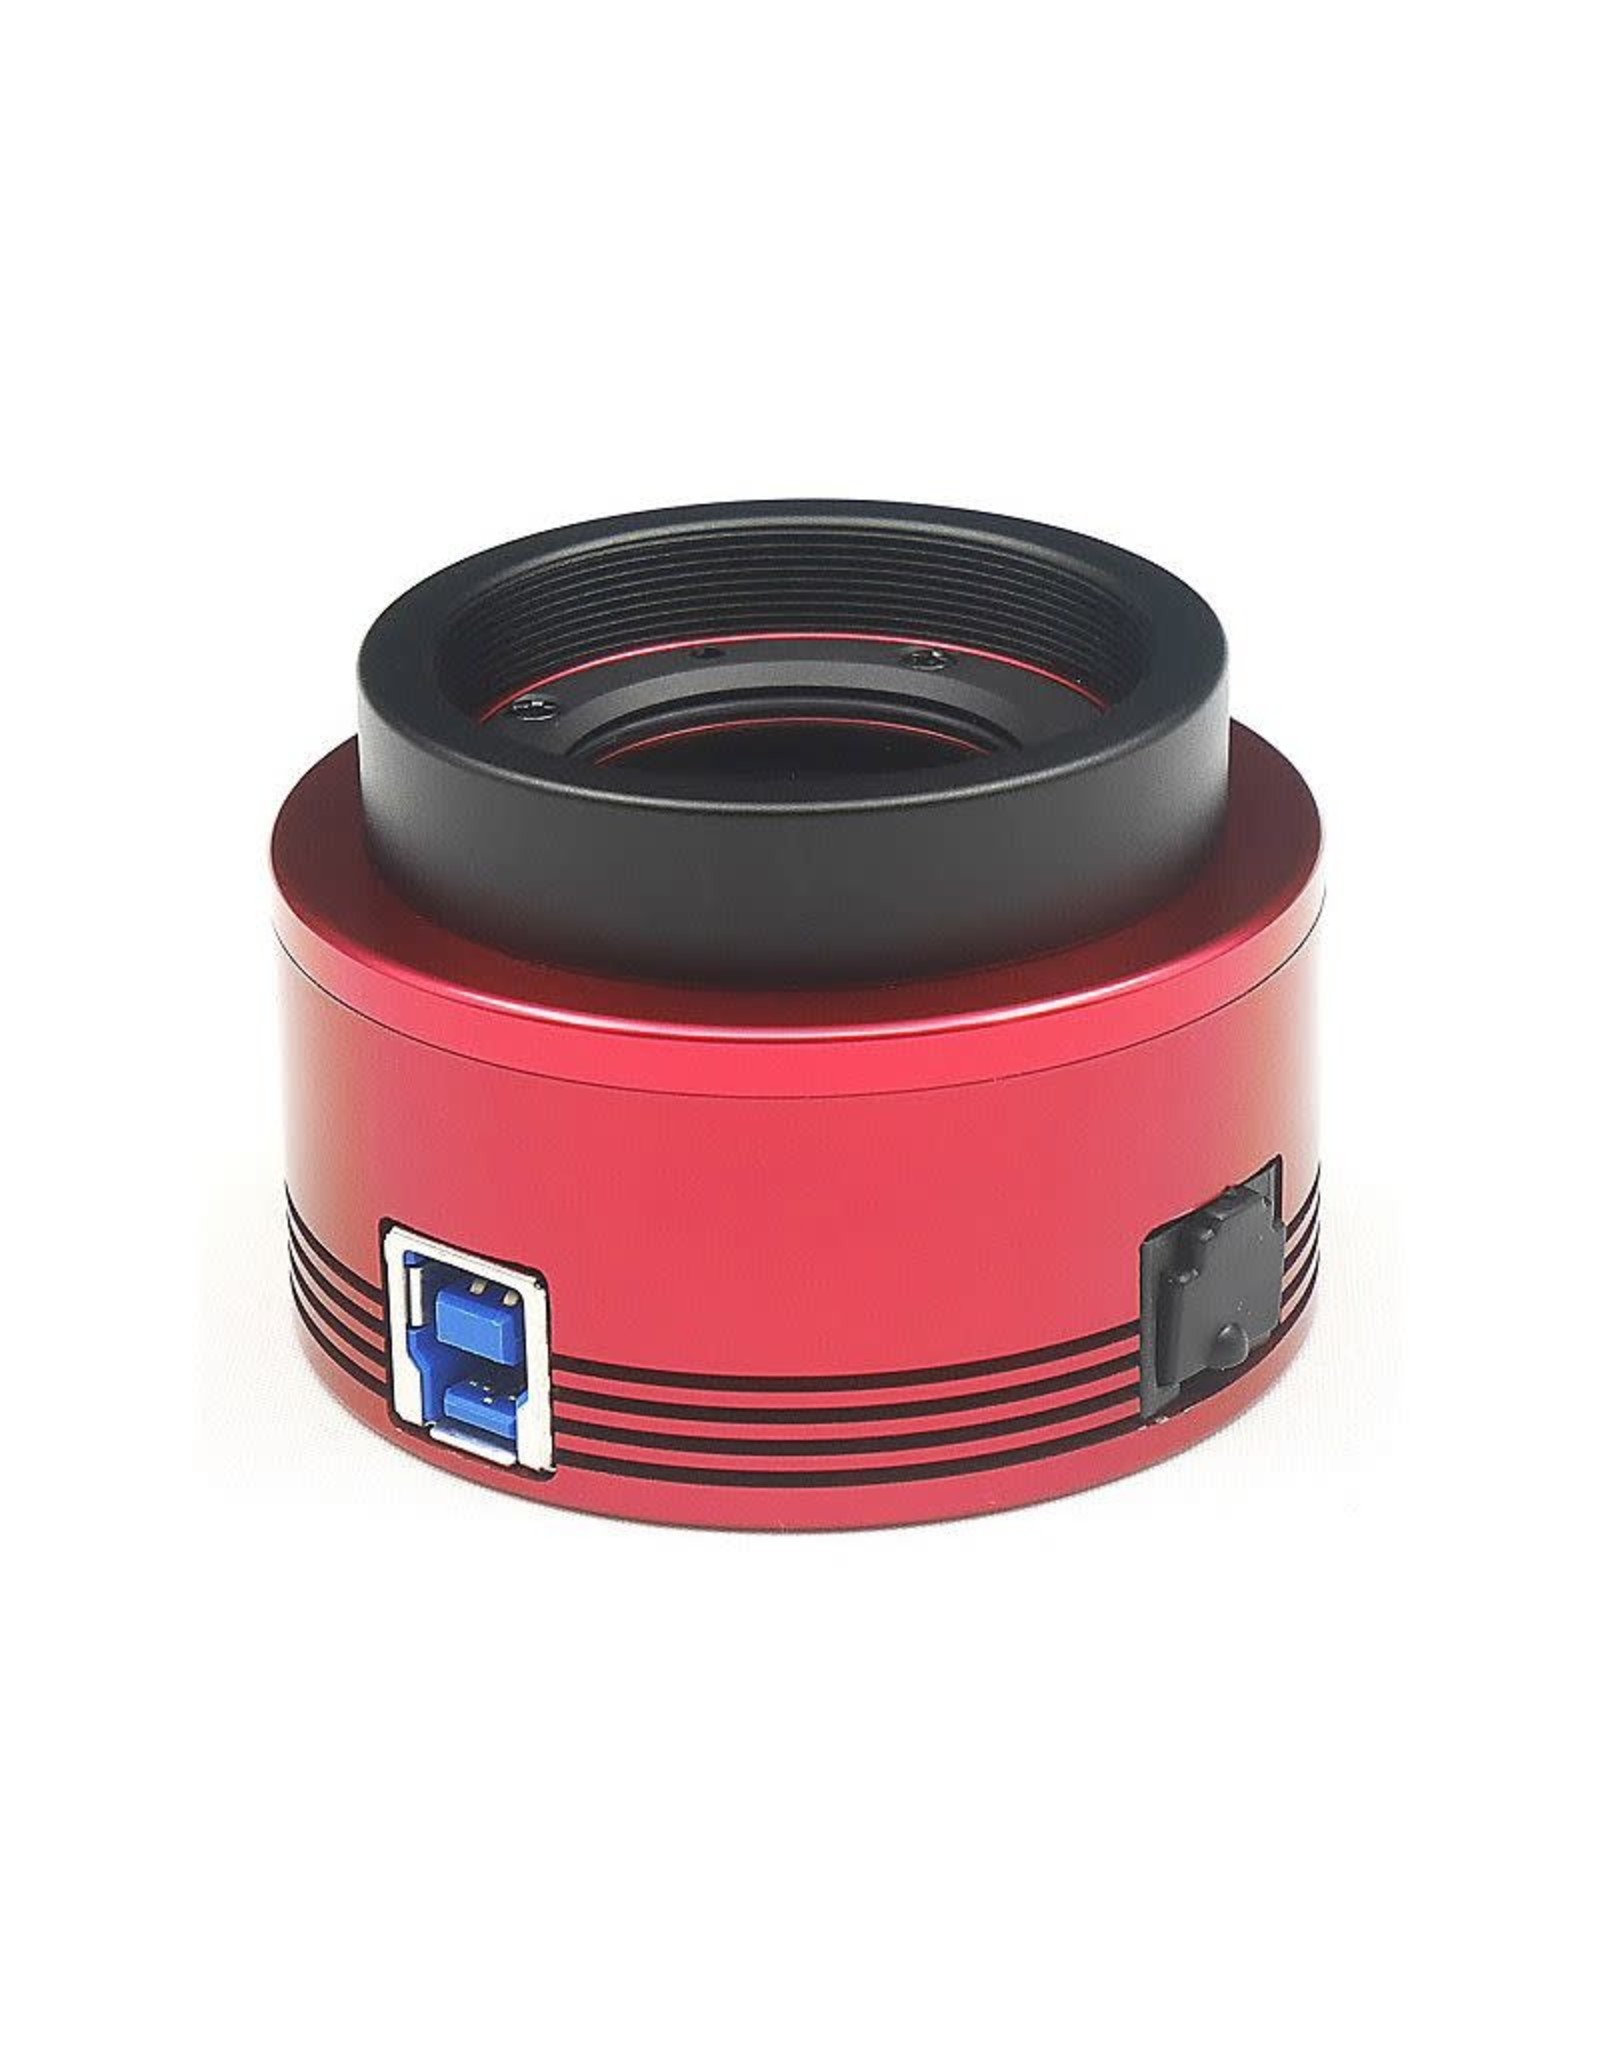 ZWO ZWO ASI183MM Monochrome (2.4 microns) CMOS Astronomy Camera with USB 3.0 Connection